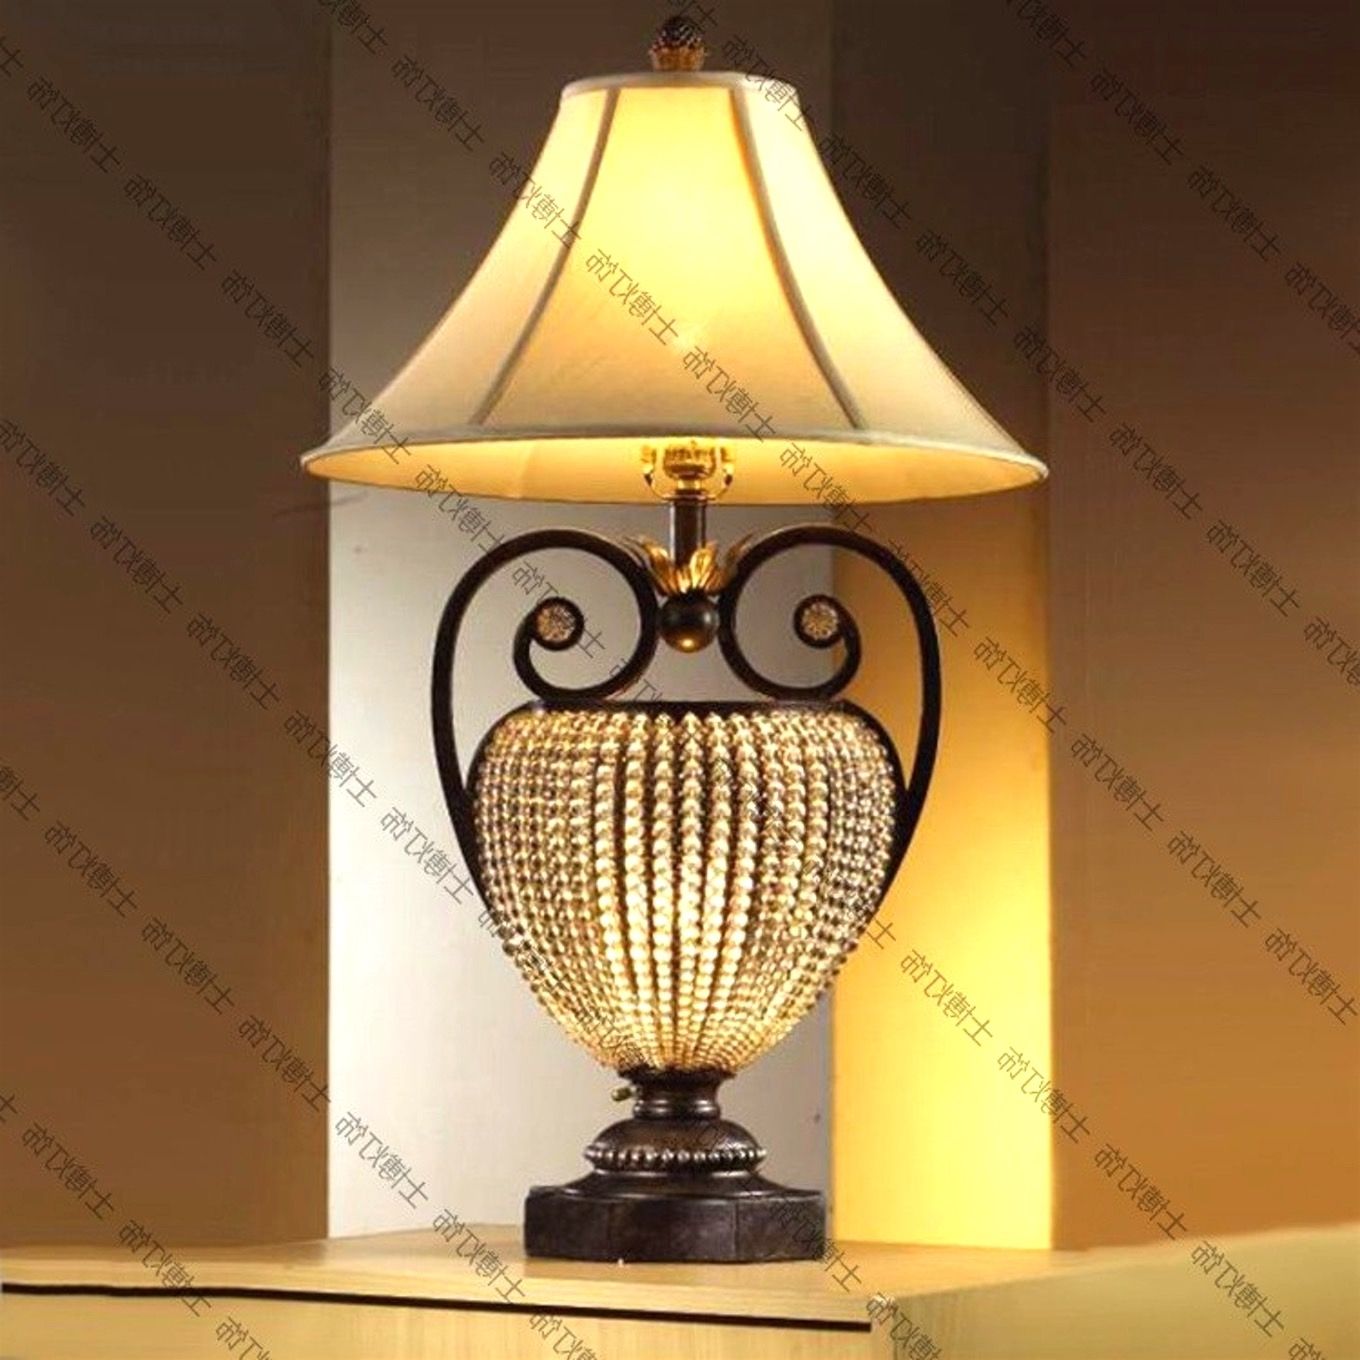 Bedside Lamps ~ Traditional Table Lamps For Living Room Traditional Inside Traditional Table Lamps For Living Room (View 11 of 15)